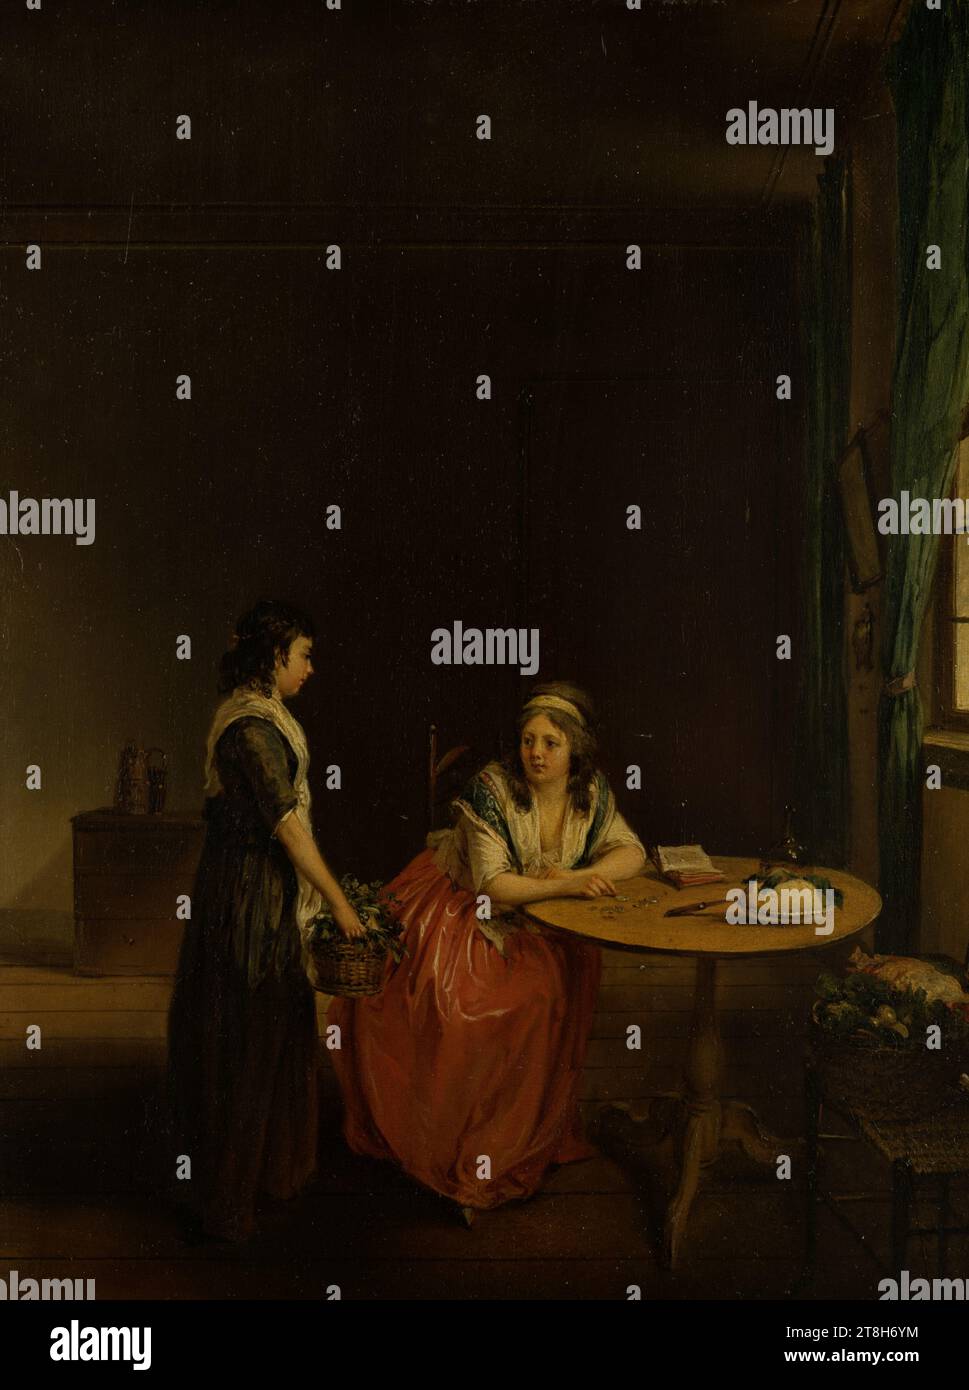 GEORG KARL HOLIDAY, A housewife settles accounts with her maid, 1798, dimensions, 34.6 x 26.9 x min. 0.4 cm, depth max, 1.0 cm, oil on panel, A housewife settles accounts with her maid, painter, GEORG KARL HOLIDAY, 18TH CENTURY, BAROQUE, PAINTING, oil on wood, WOOD, OIL, inscribed lower left: G: CV[ligated]holiday. P: Ao. 1798 Stock Photo